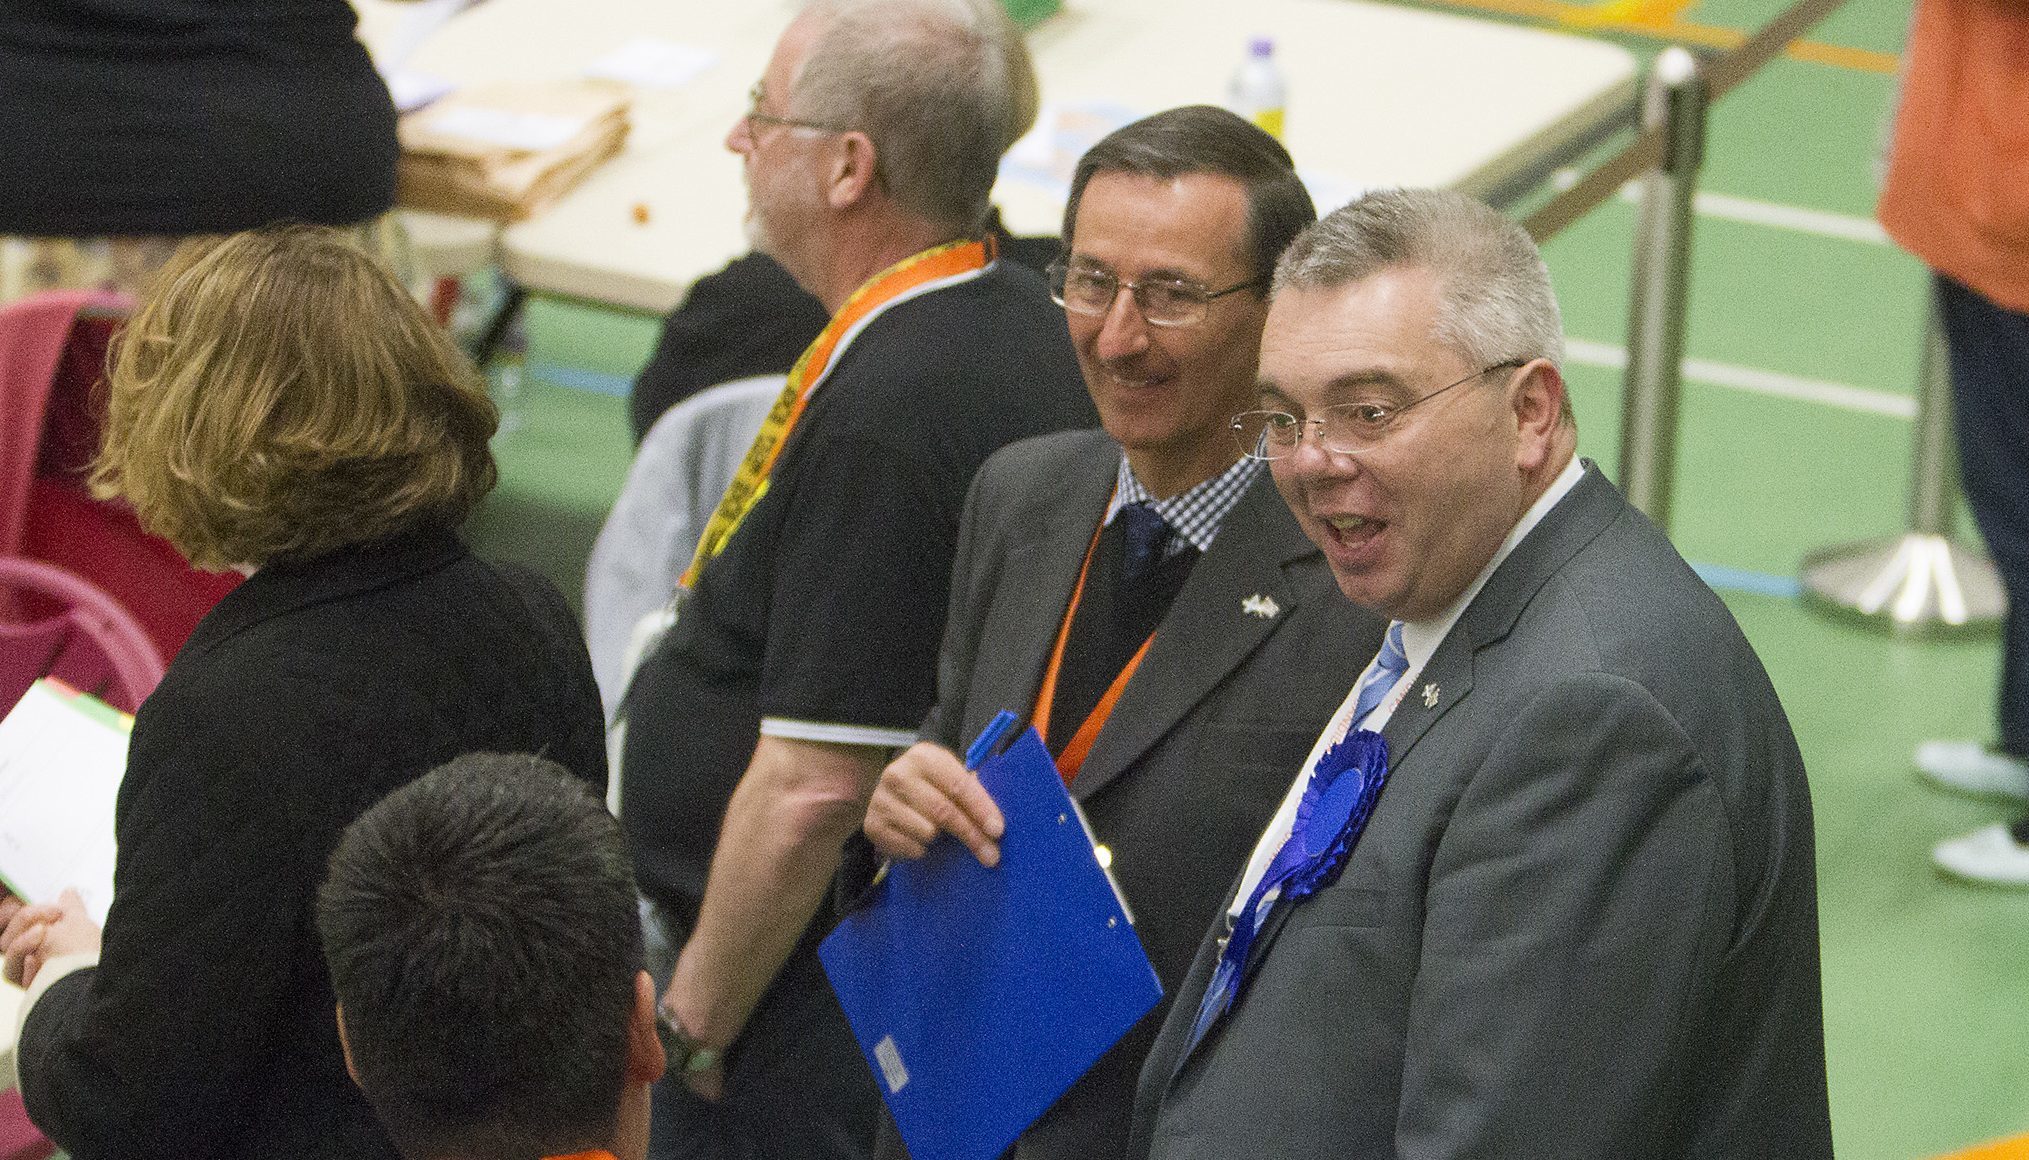 Conservative MSP Alex Johnstone at the Angus count